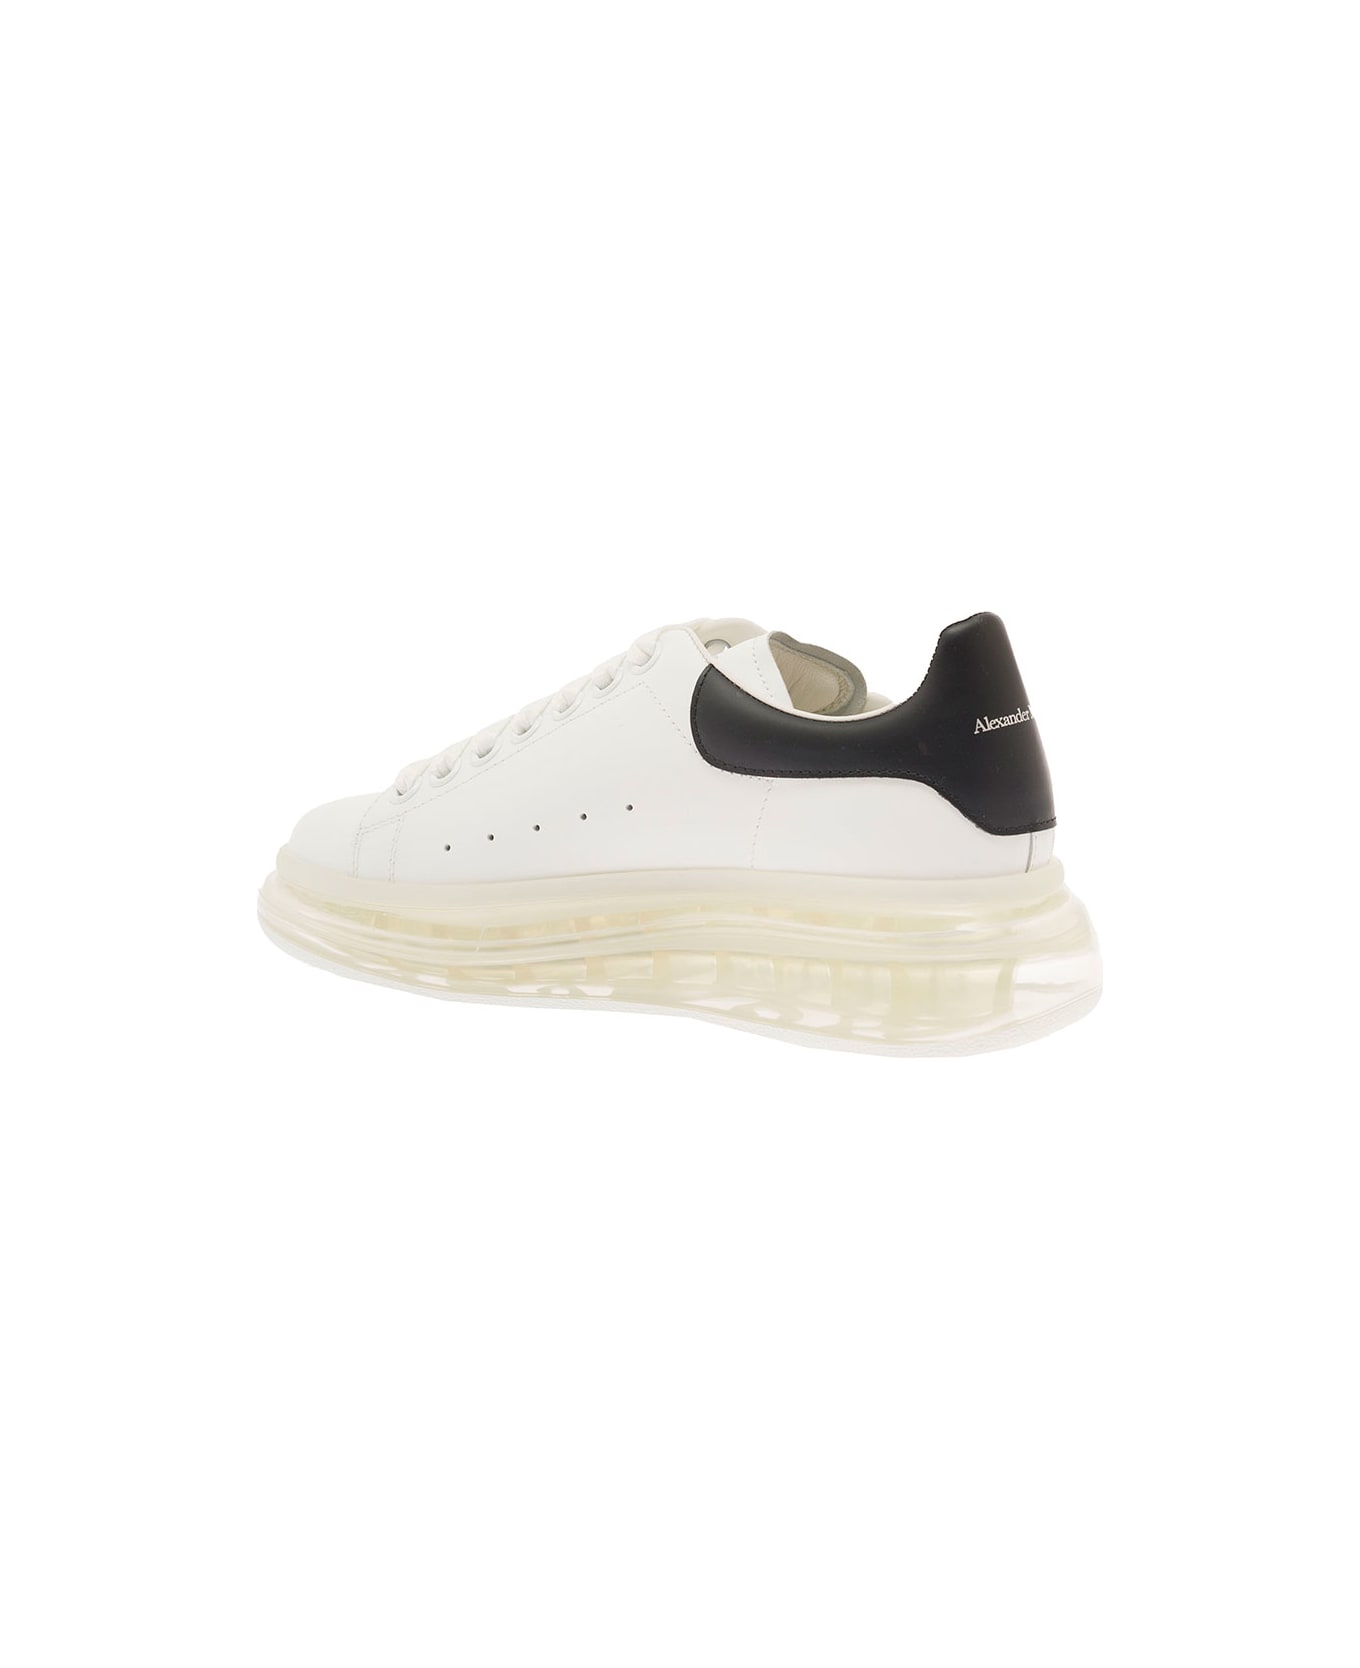 Alexander McQueen Transaparent Big Sole White Sneakers In Leather Man - White